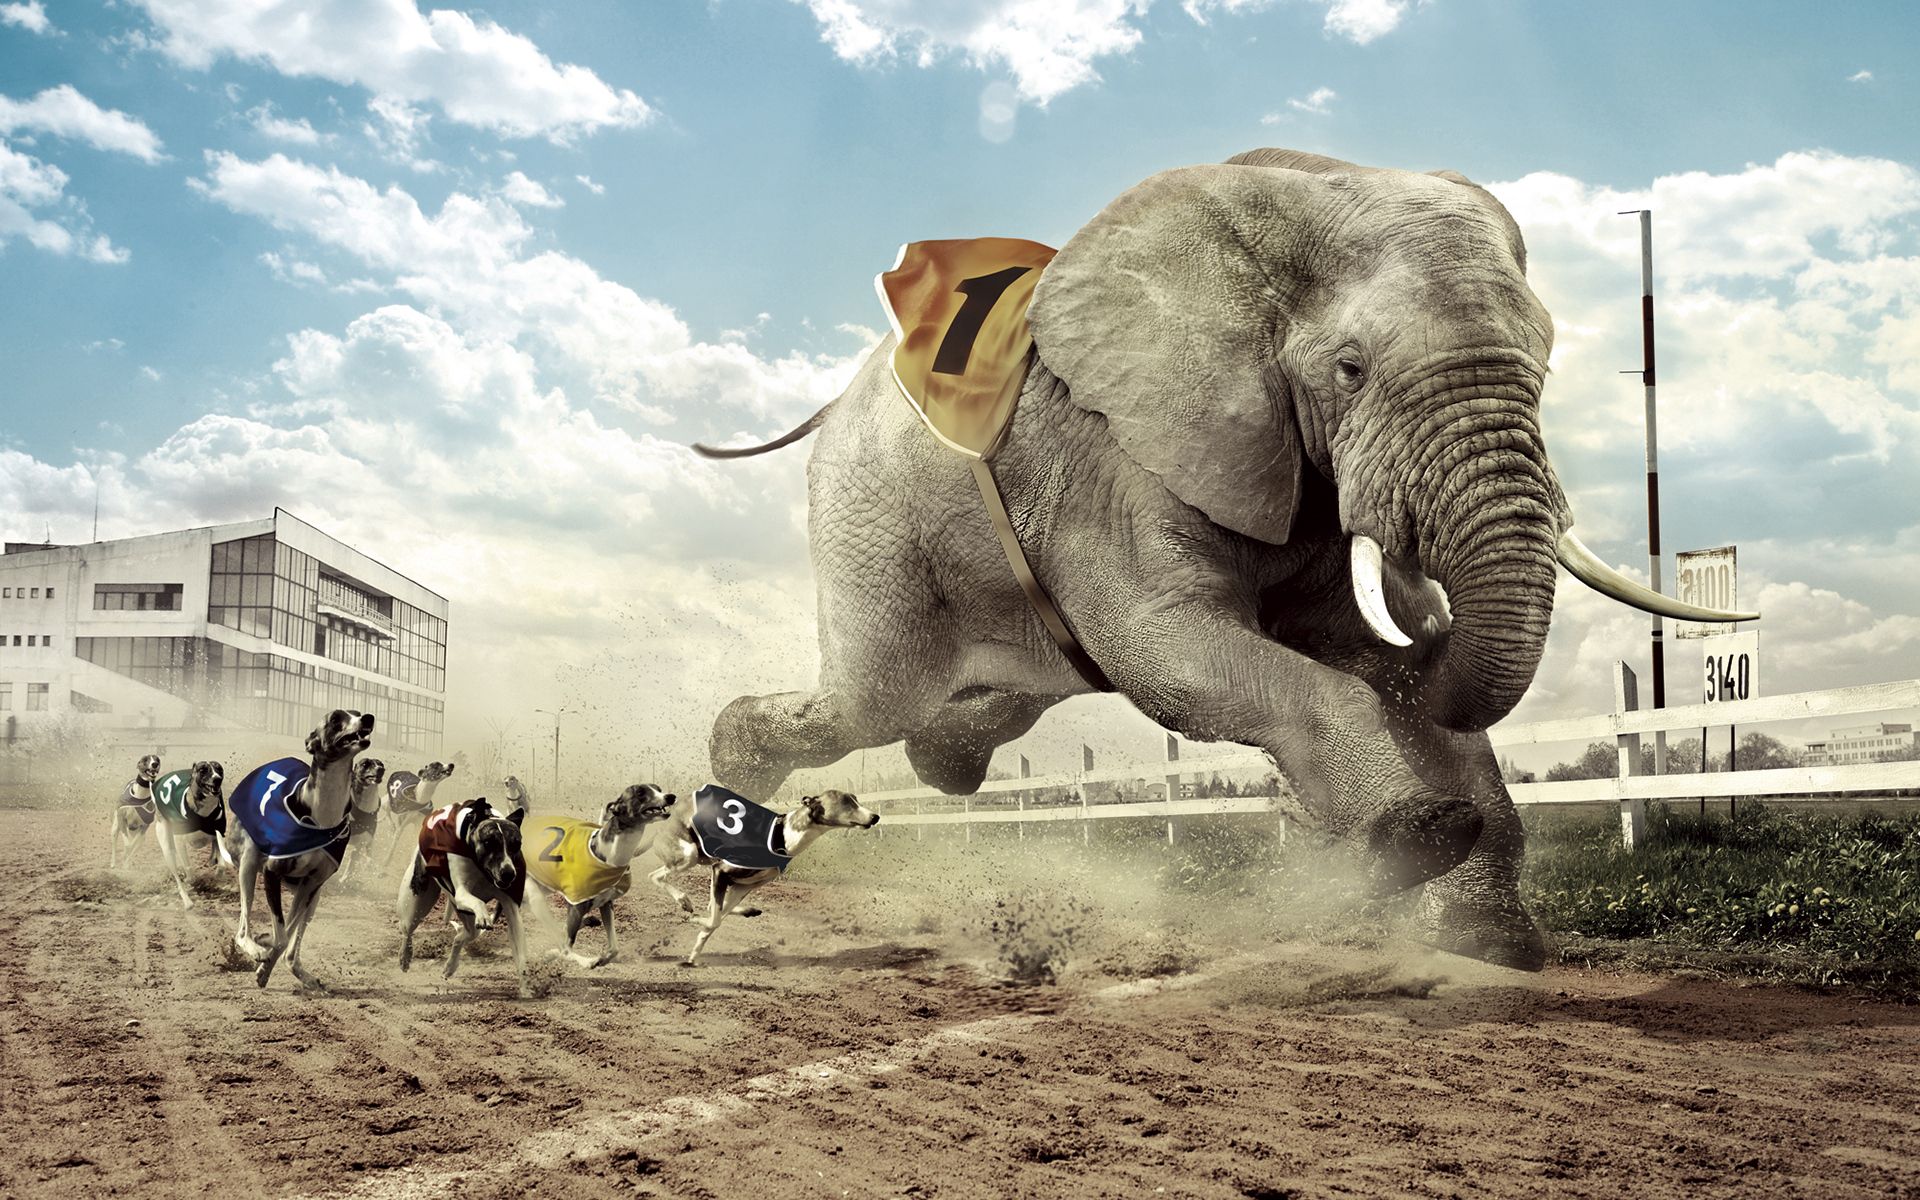 61414 download wallpaper animals, grass, sky, sand, building, lights, dog, lanterns, house, glass, fence, fangs, cloud, track, elephant, heat, race, competition screensavers and pictures for free